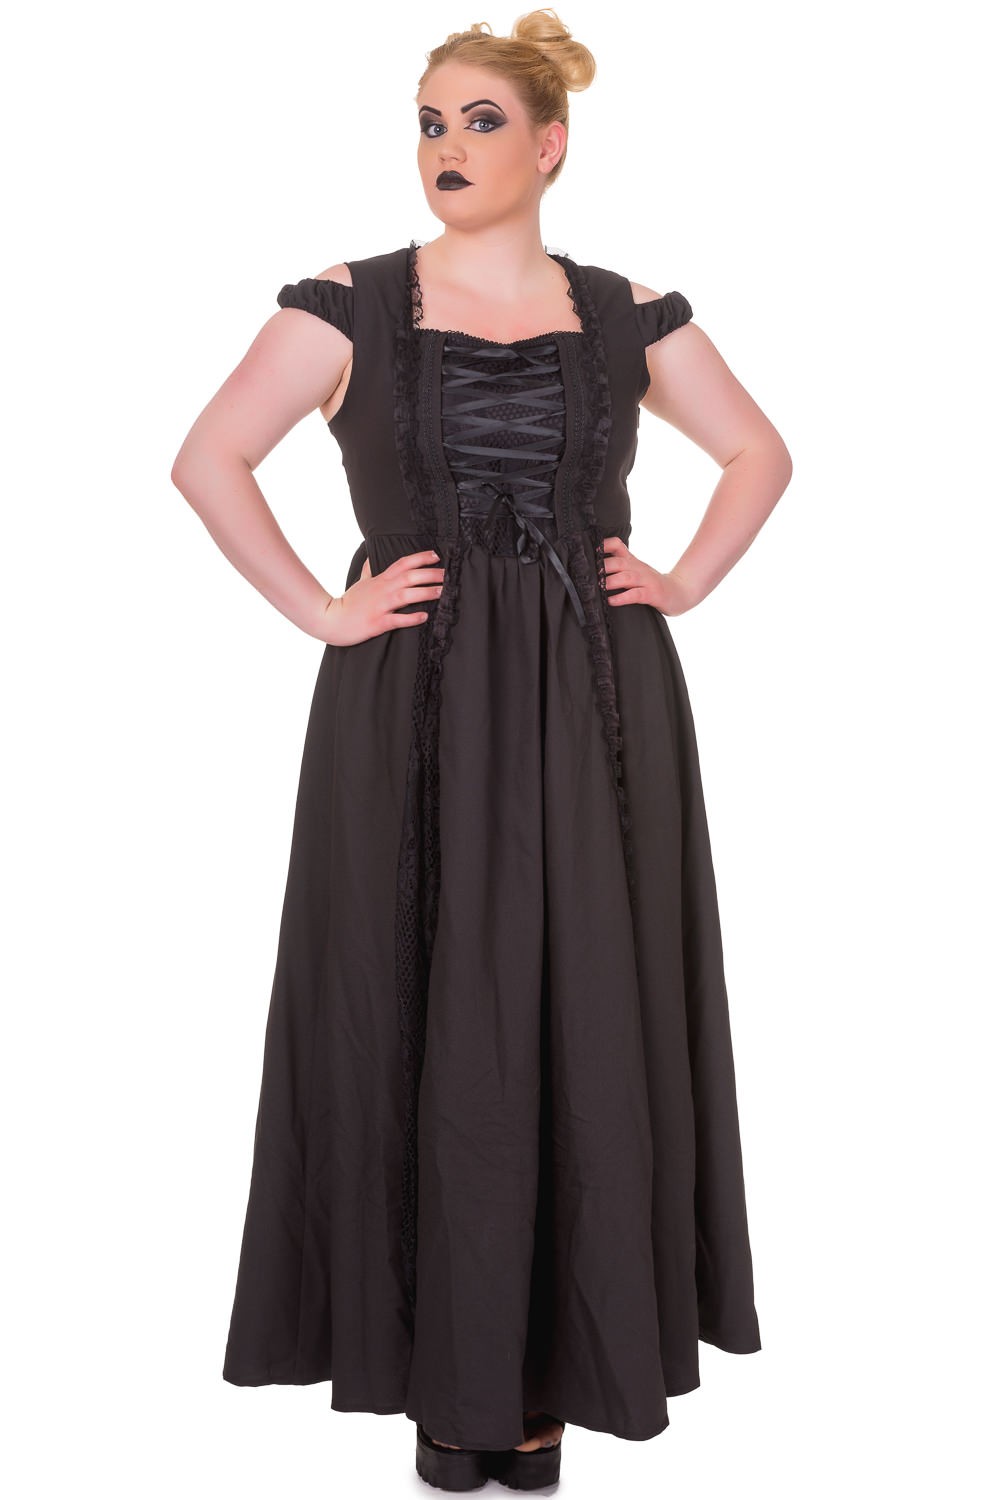 Victorian Corset Style Sleeveless Black Maxi Dress - SOLD OUT